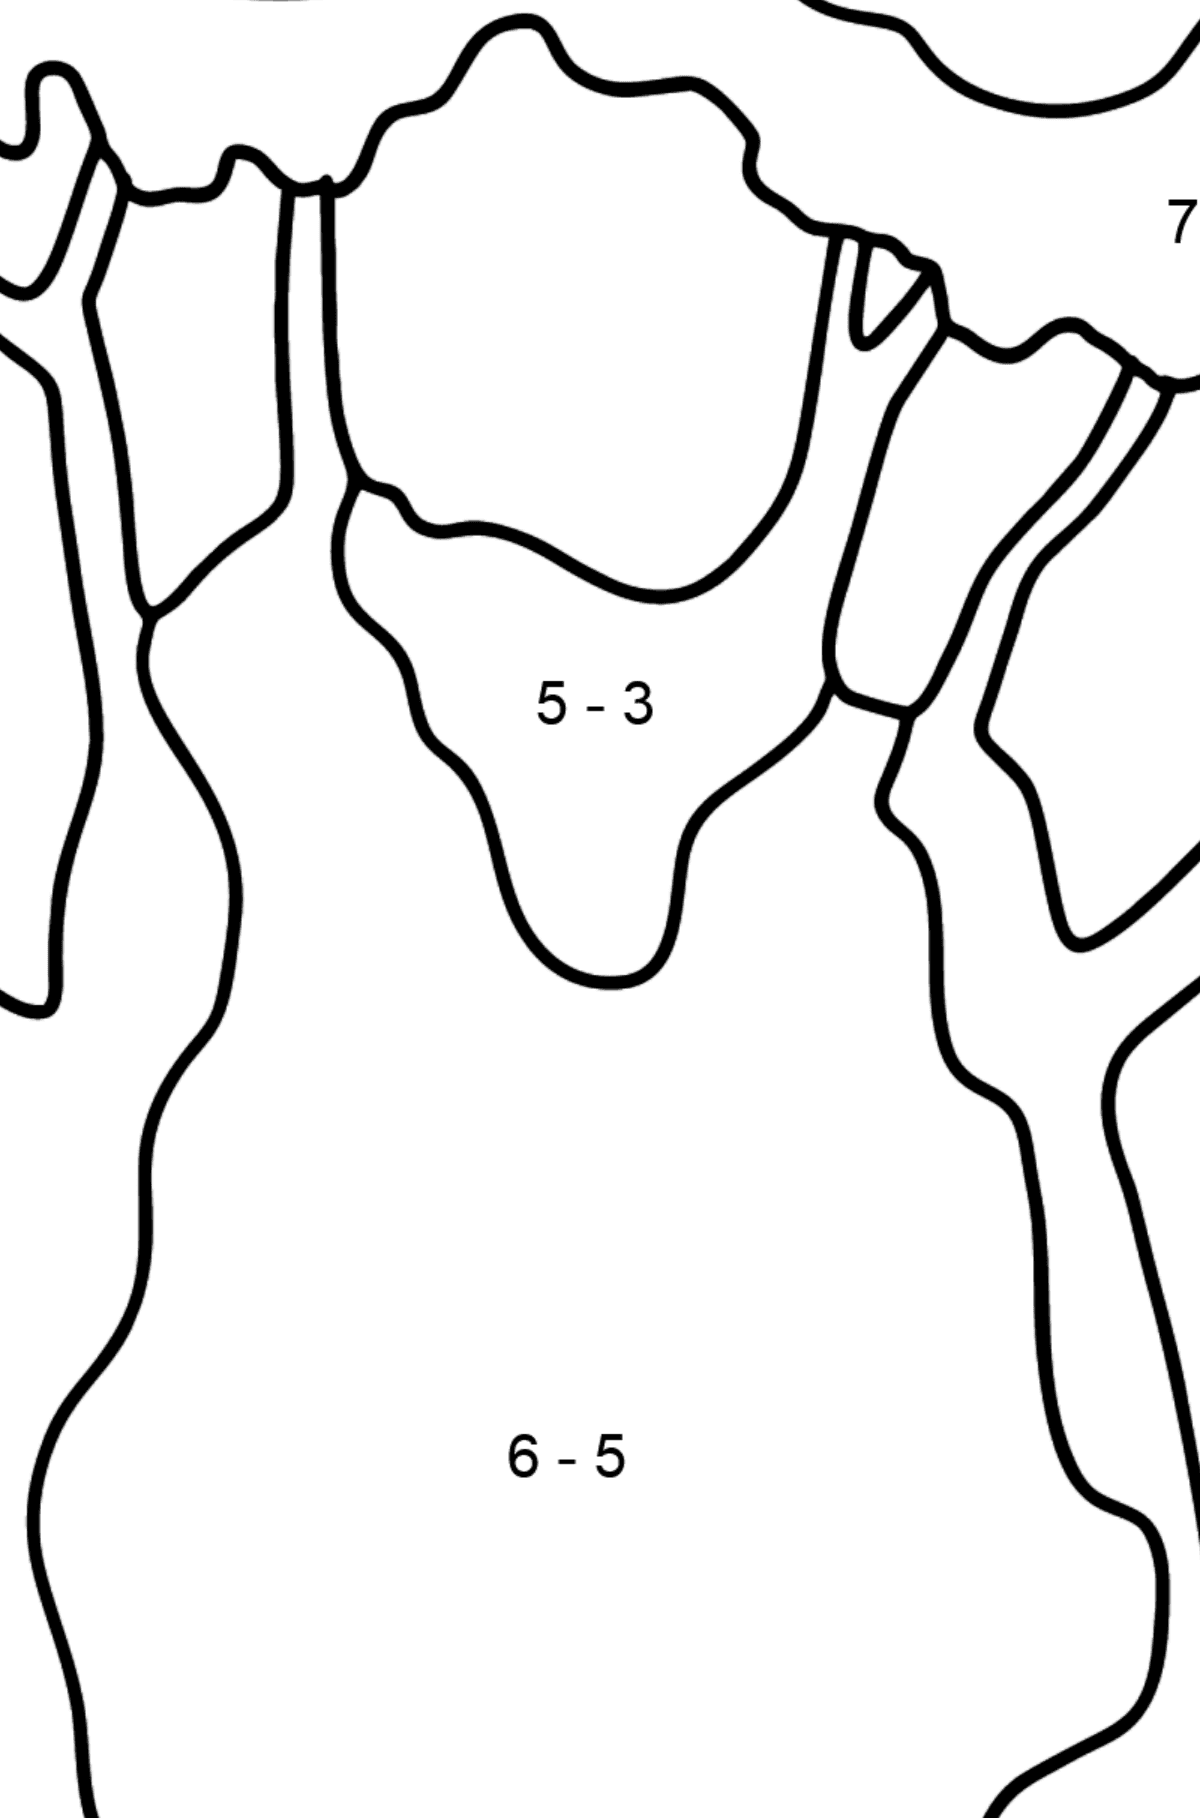 Baobab coloring page - Math Coloring - Subtraction for Kids